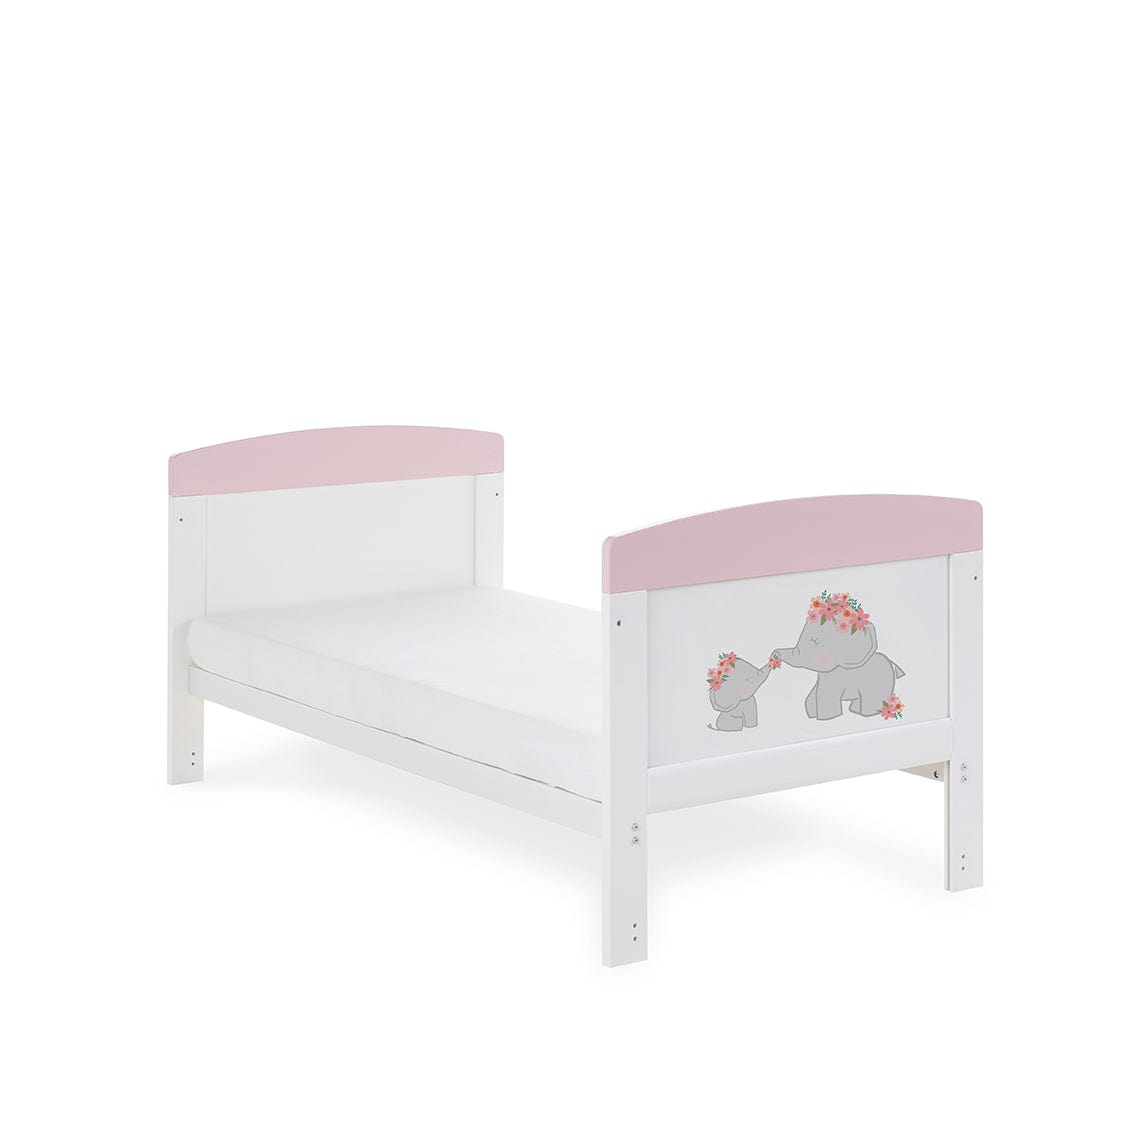 Obaby Cot & Cot Bed OBABY Grace Inspire Cot Bed - Me & Mini Me Elephants - Pink